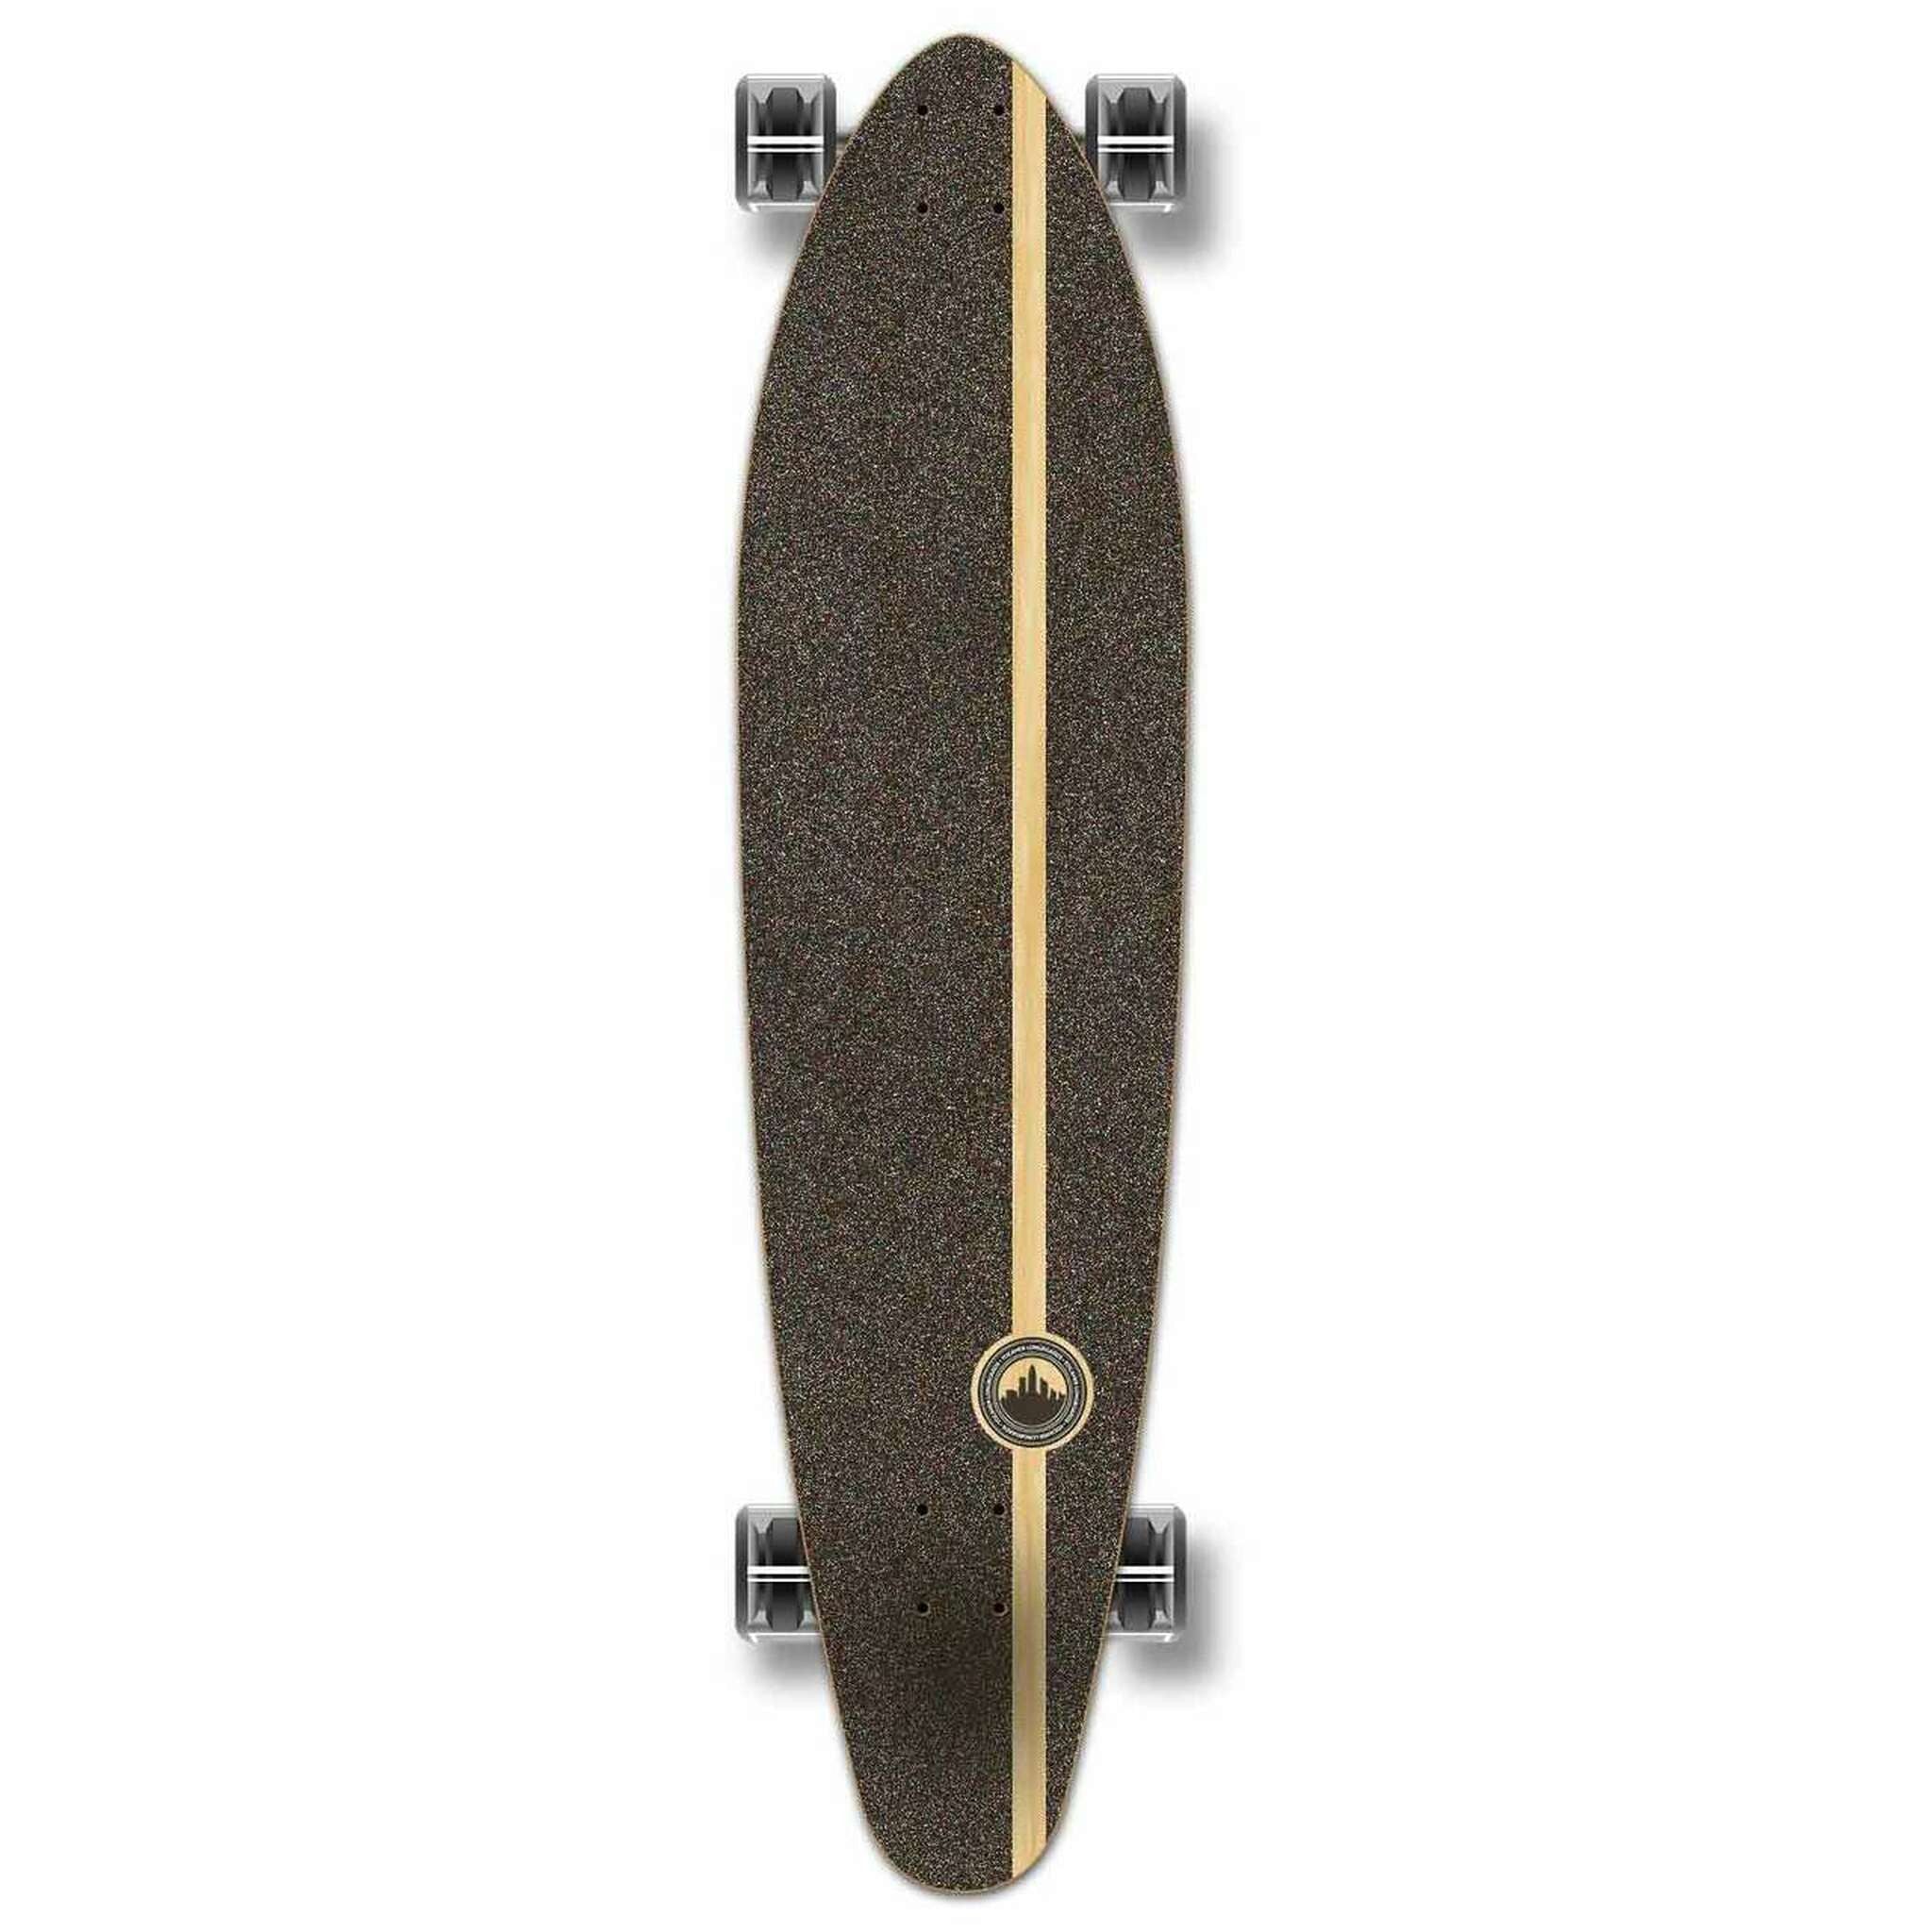 YOCAHER - Checker White Kicktail Longboard - Planche Complete